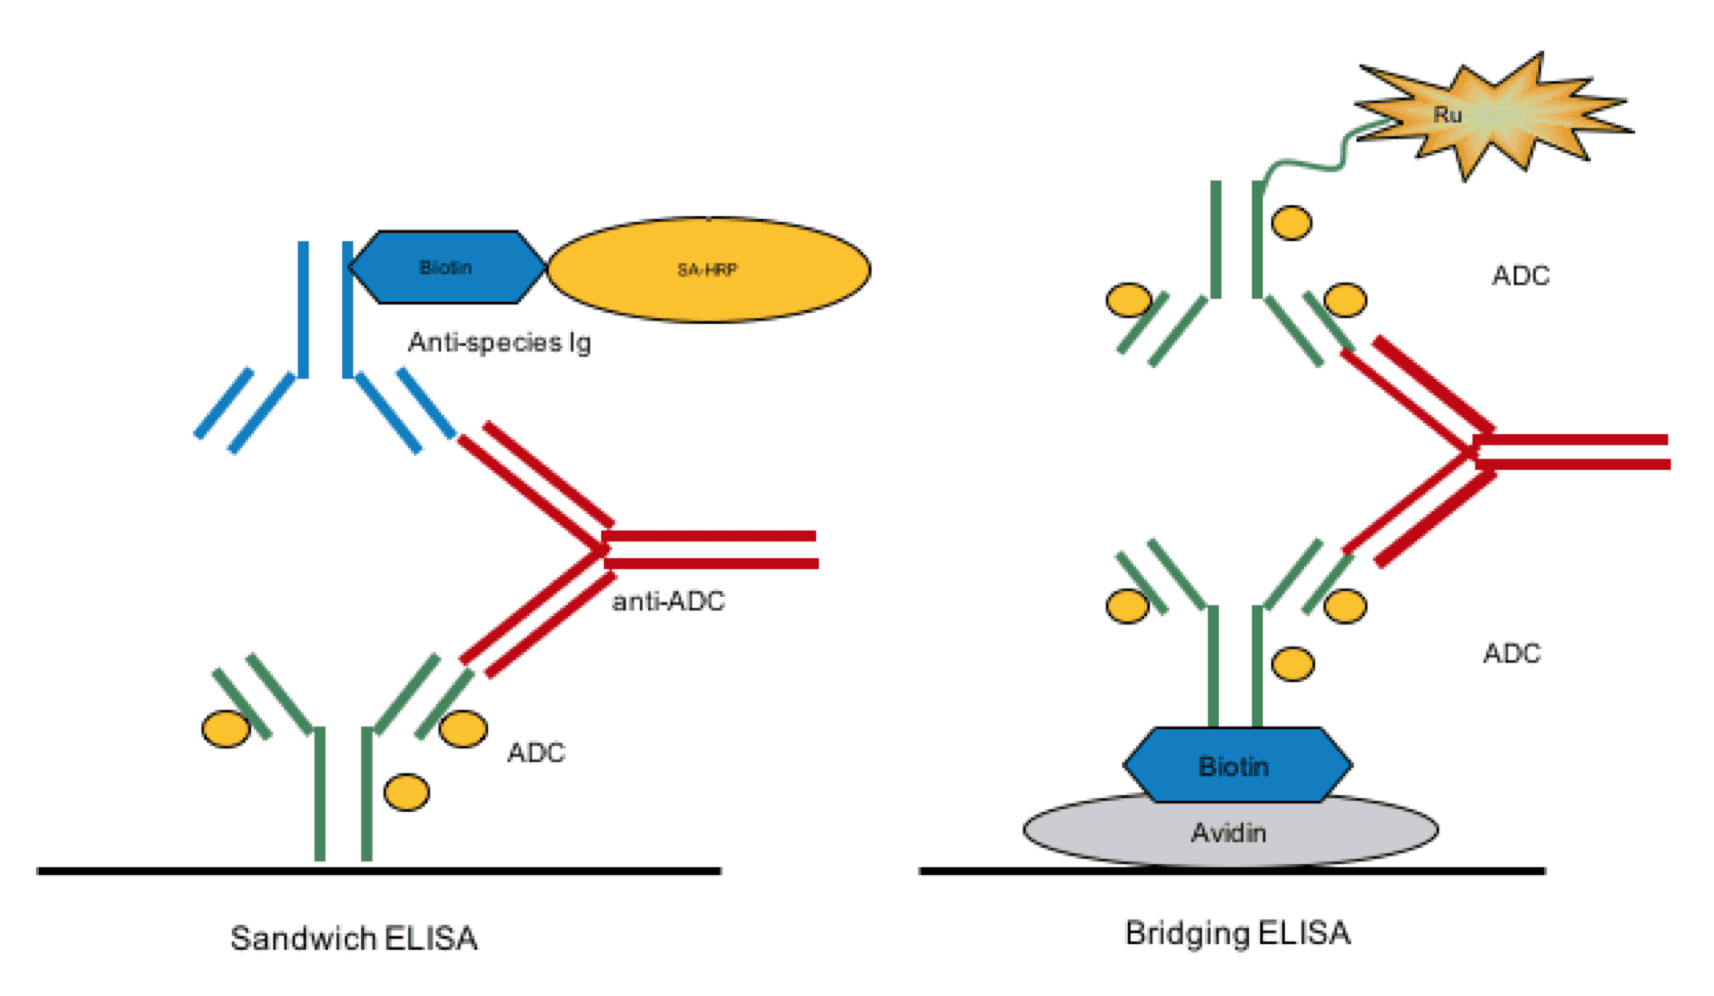 Sandwich ELISA and  Bridging ELISA for ADA screening assays. In bridging ELISA, ADC performs as  capture agent while the ADA is detected by labeled ADC. Sandwich ELISA uses ADC  coated plates to screen samples containing ADAs using labeled antispecies-specific  antibodies as indicators.